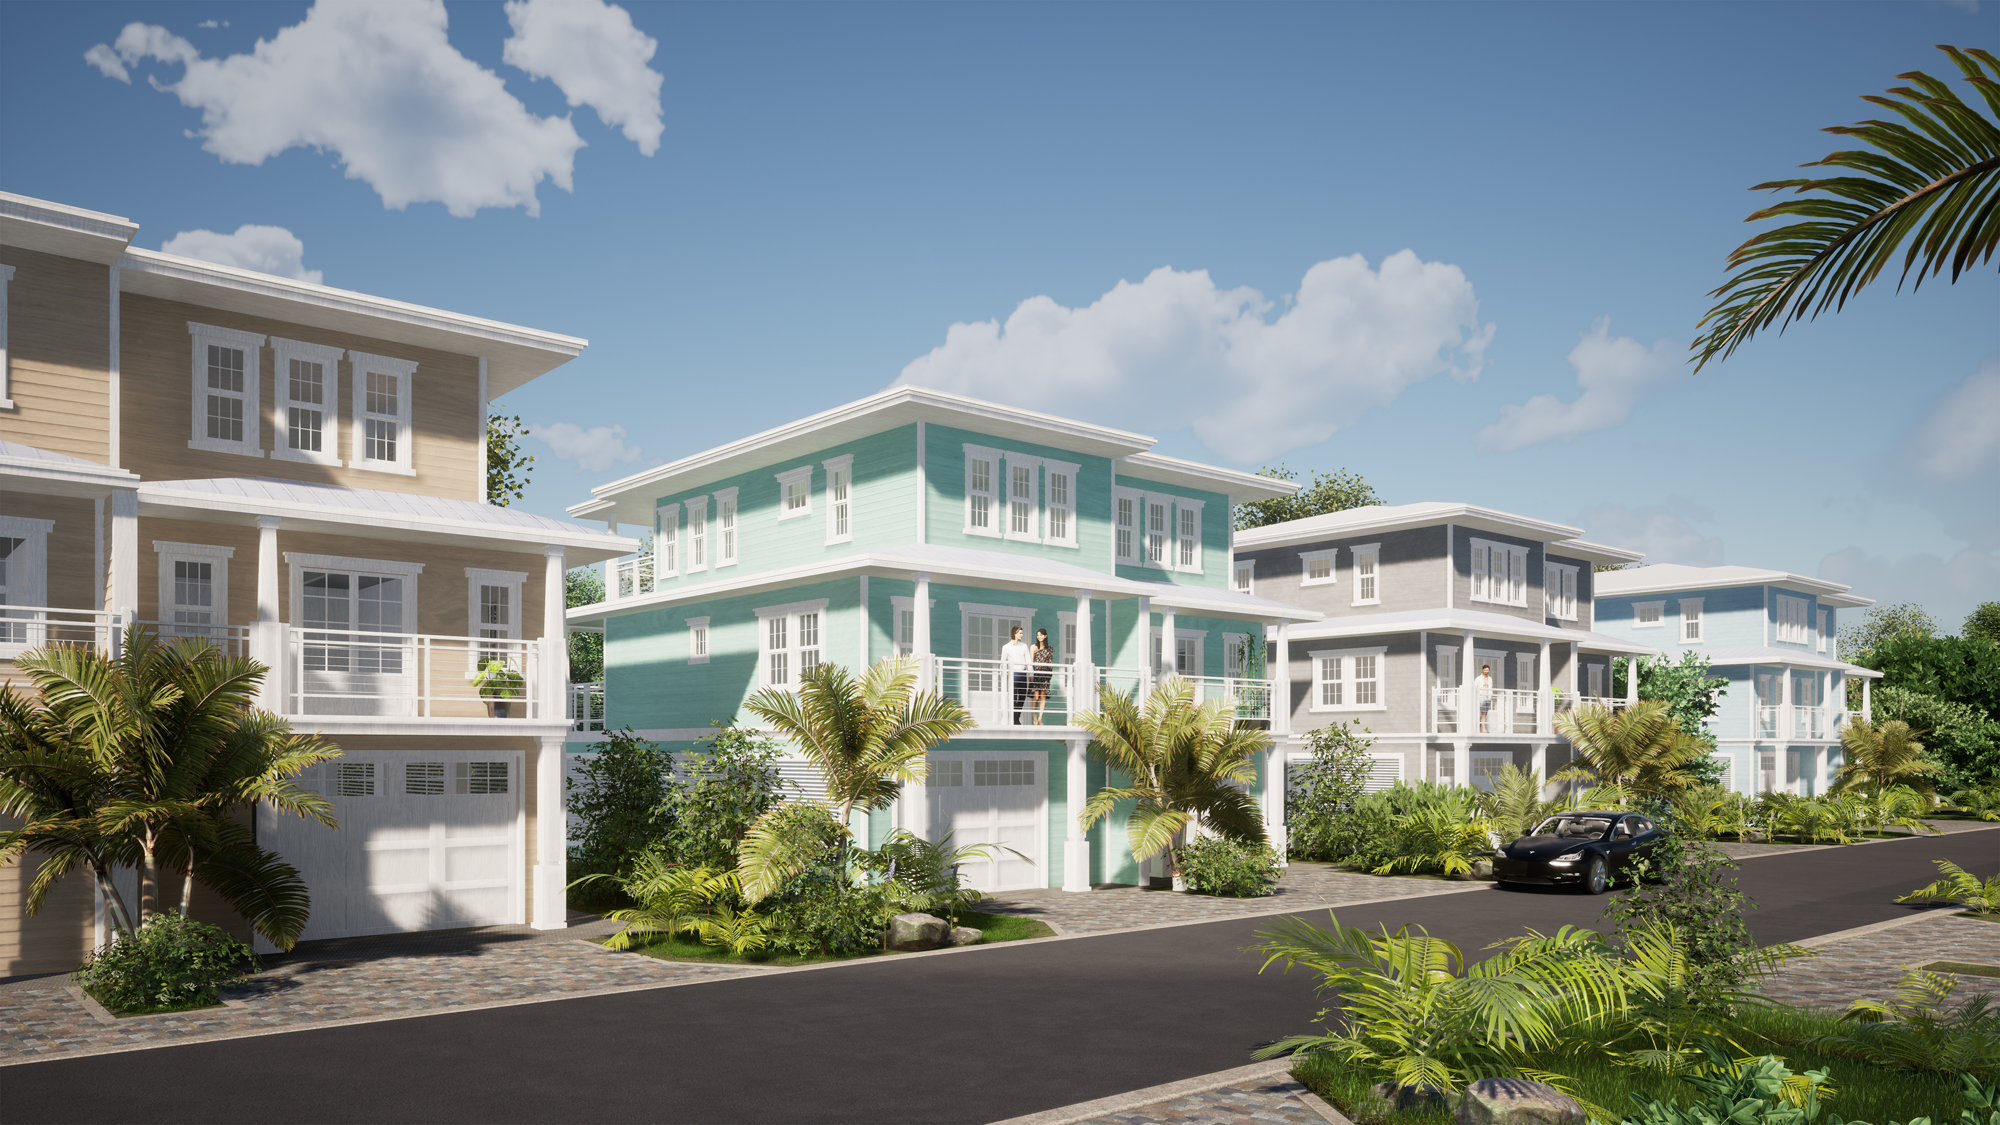 Courtesy. Pearl Homes has named Compass Development Marketing Group as the exclusive real estate agent for Hunters Point, a 148-unit coastal community soon to be constructed in Cortez overlooking the Gulf of Mexico. 